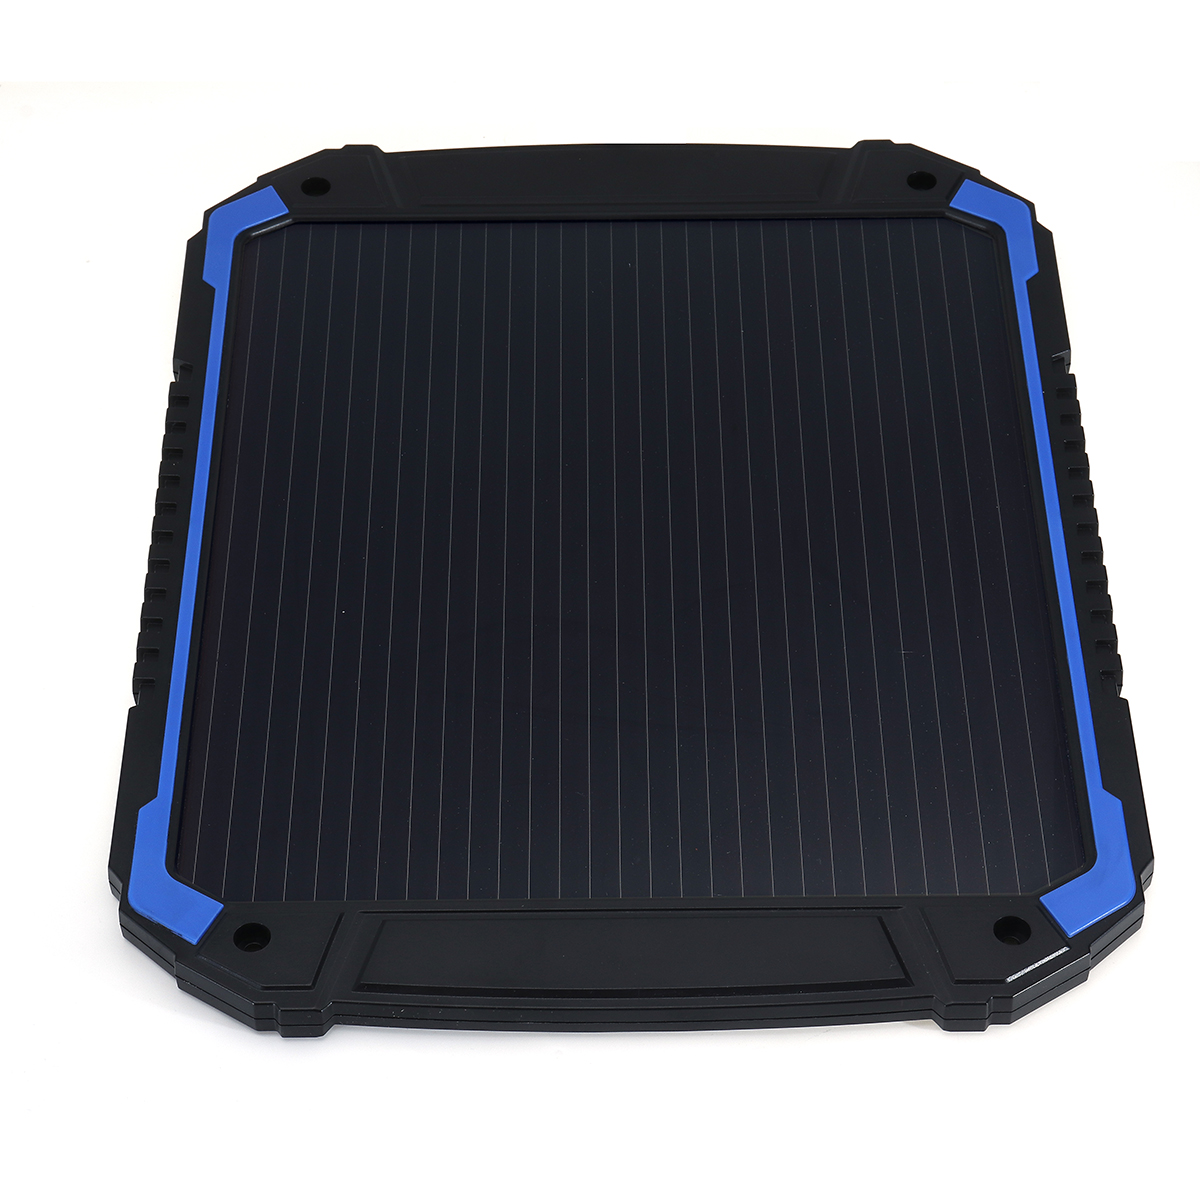 48W-18V-Portable-Solar-Panel-Power-Battery-Charger-Backup-for-Automotive-Motorcycle-Boat-Marine-RV-e-1451189-5